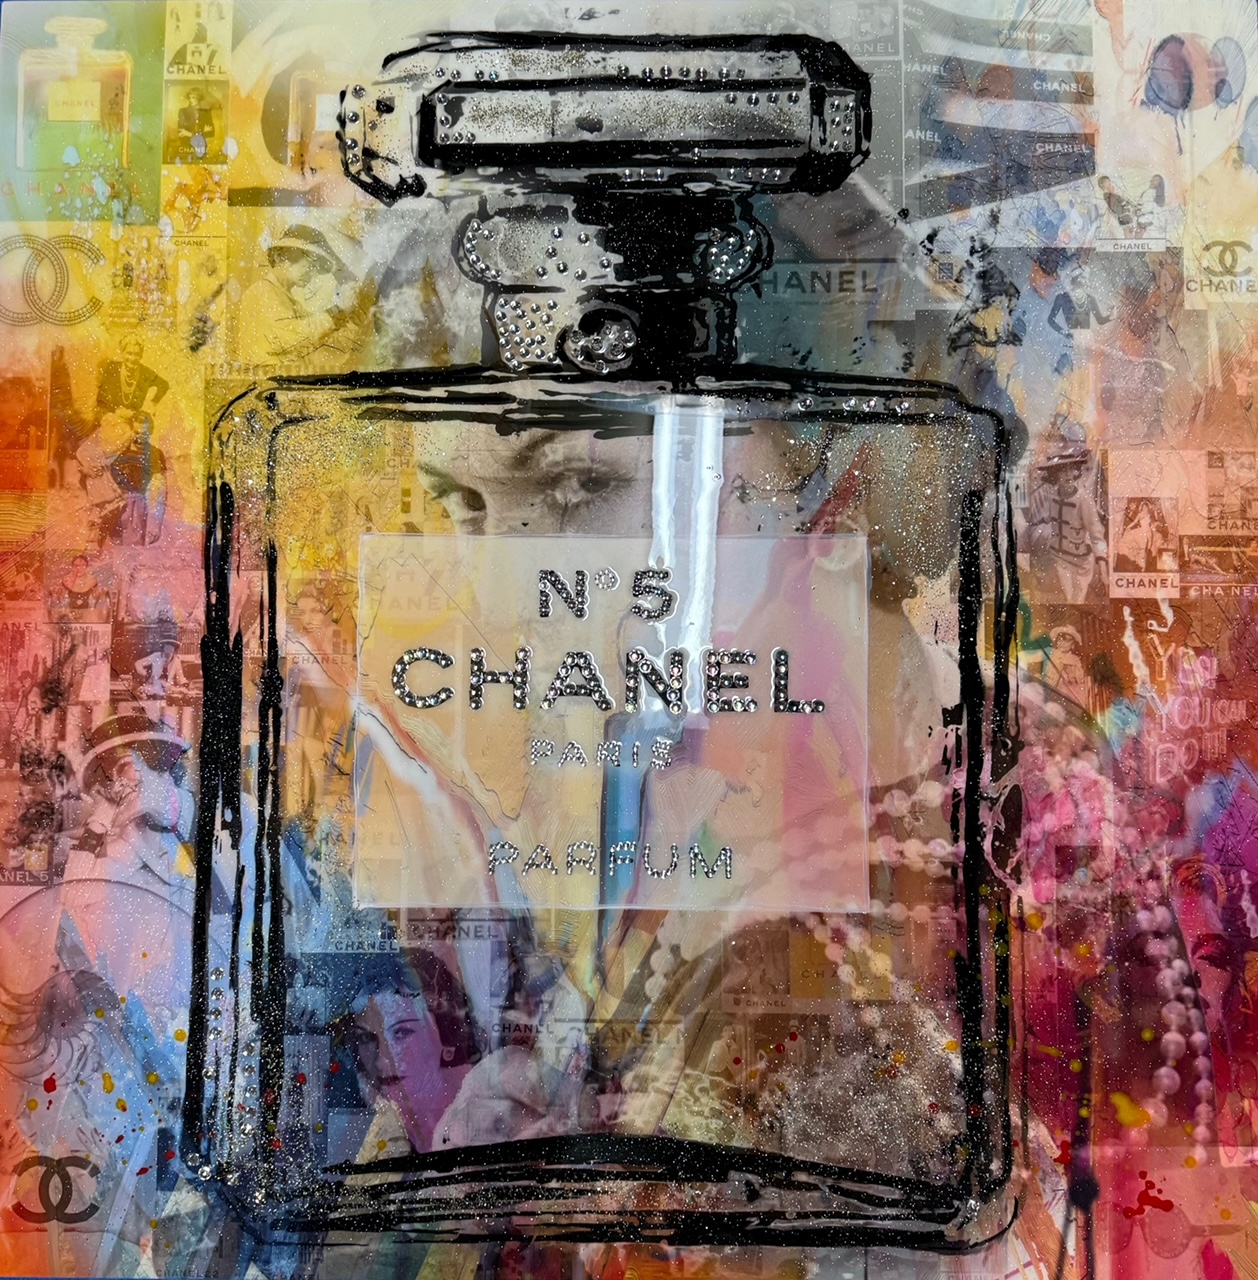 Fine Art by Chanel No 5 by Anja Whitemyer